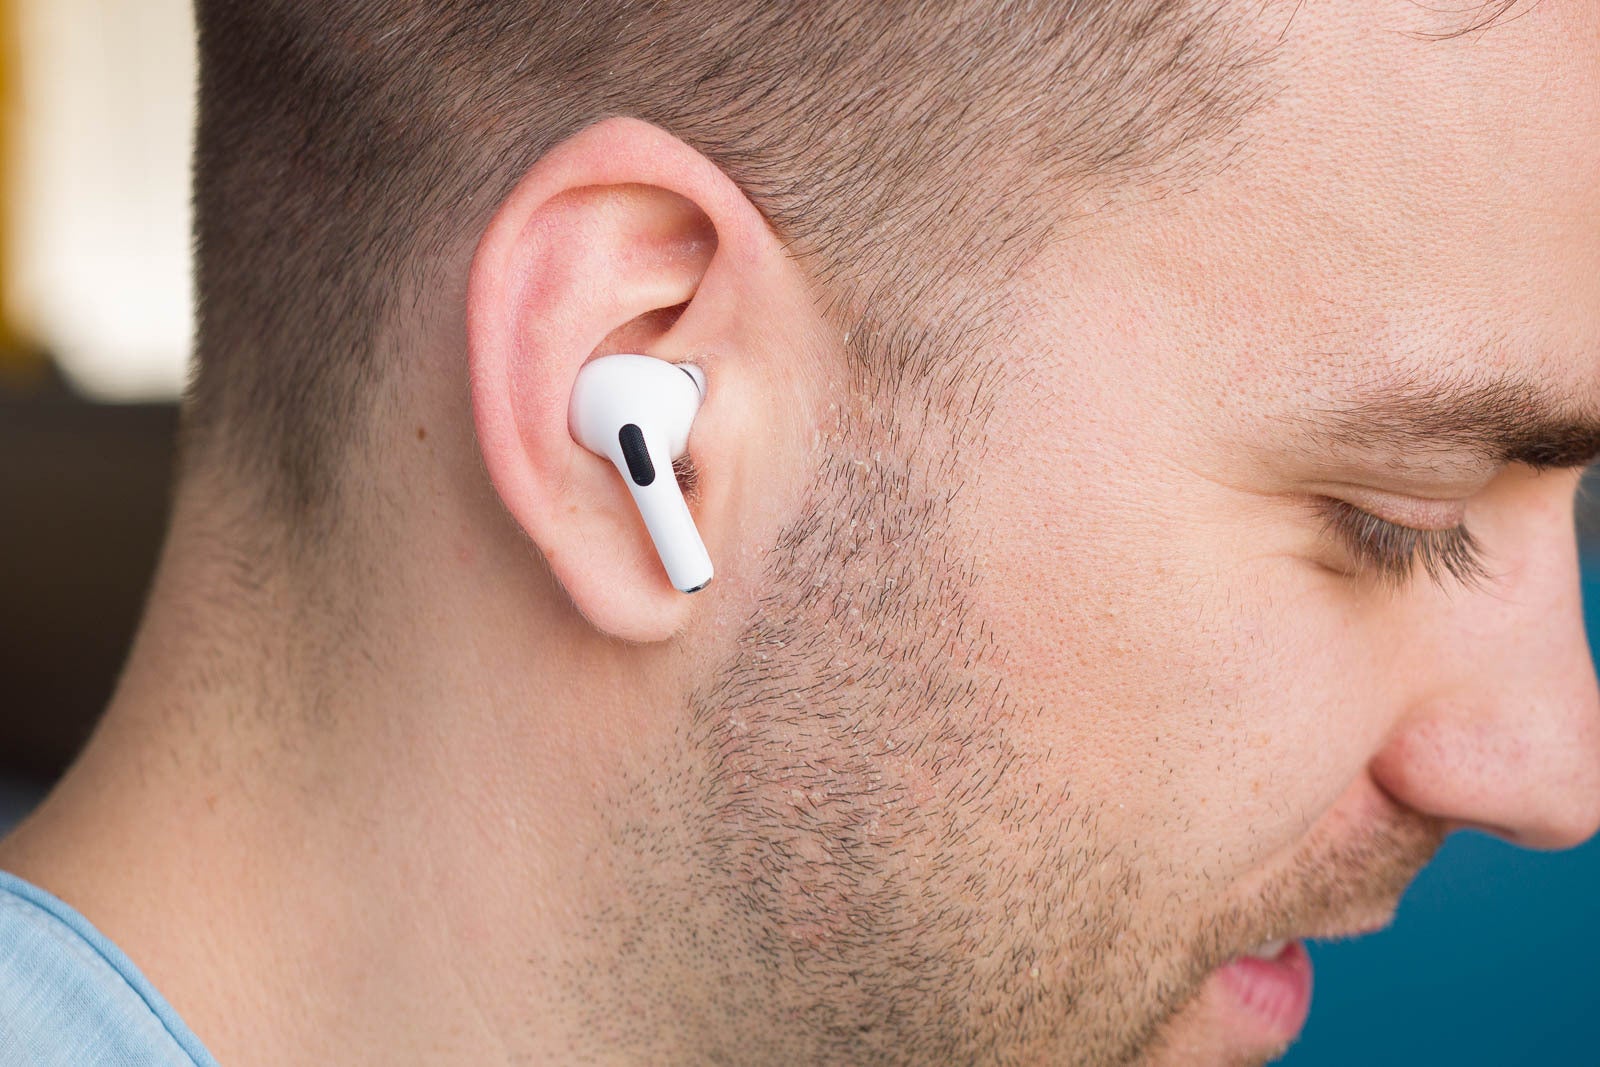 The AirPods Pro are a great pair of earbuds - Updated AirPods Pro with MagSafe are already $29 off